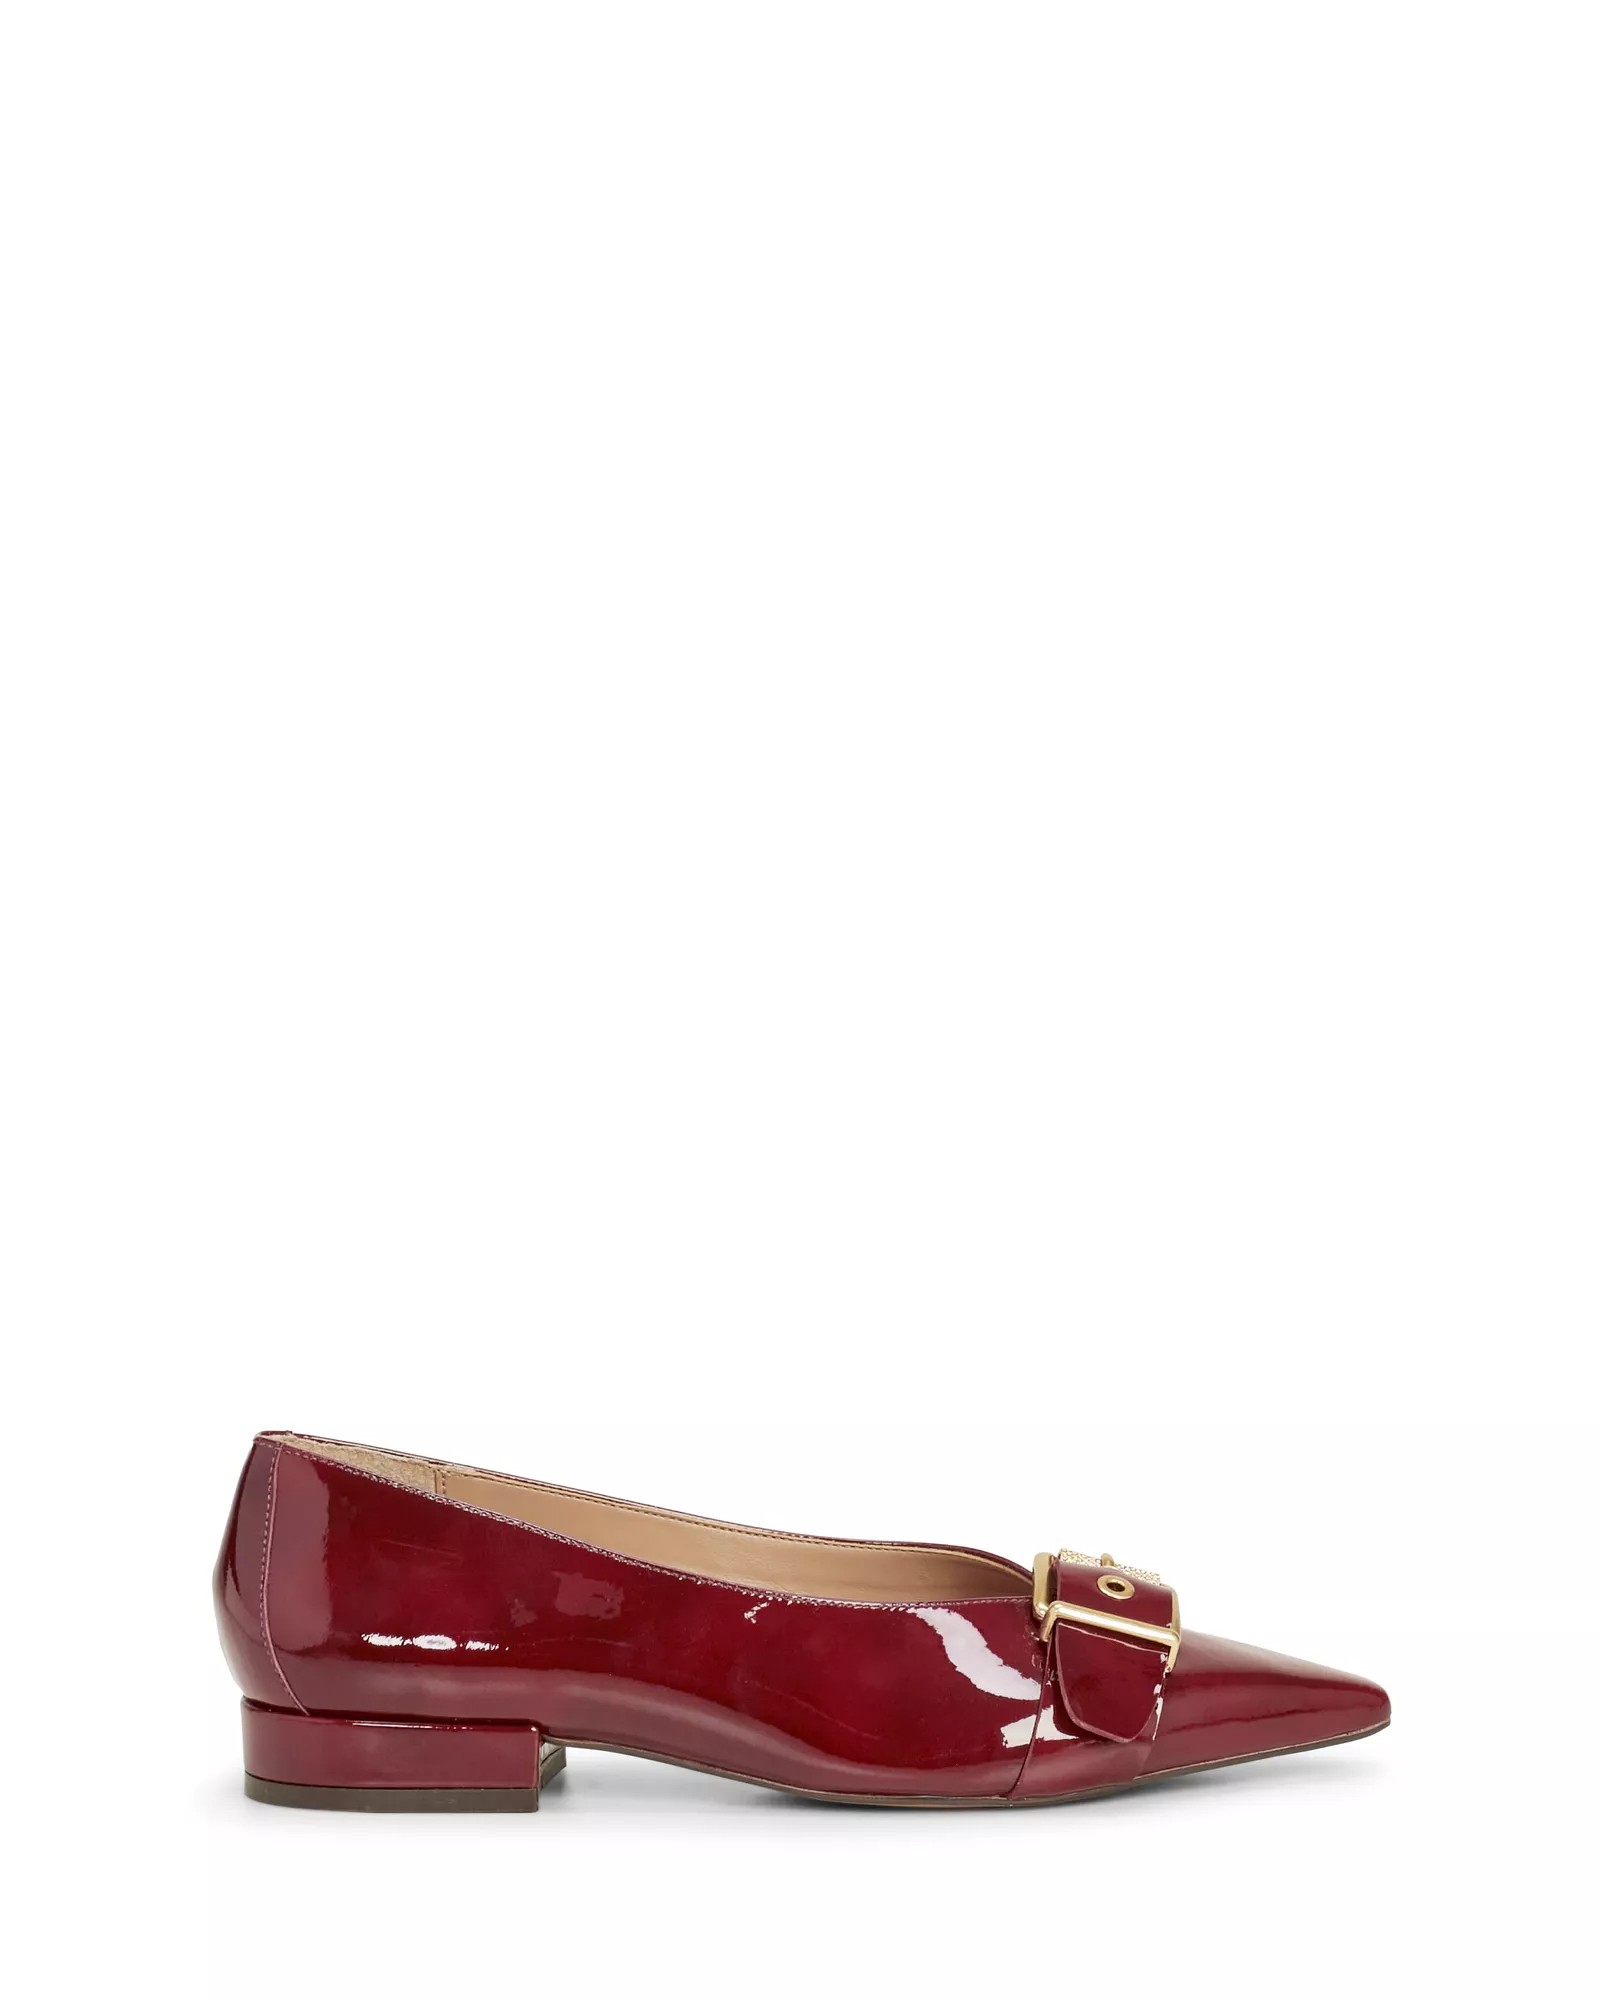 Women's Vince Camuto Megdele Flats Size 5 Red Currant